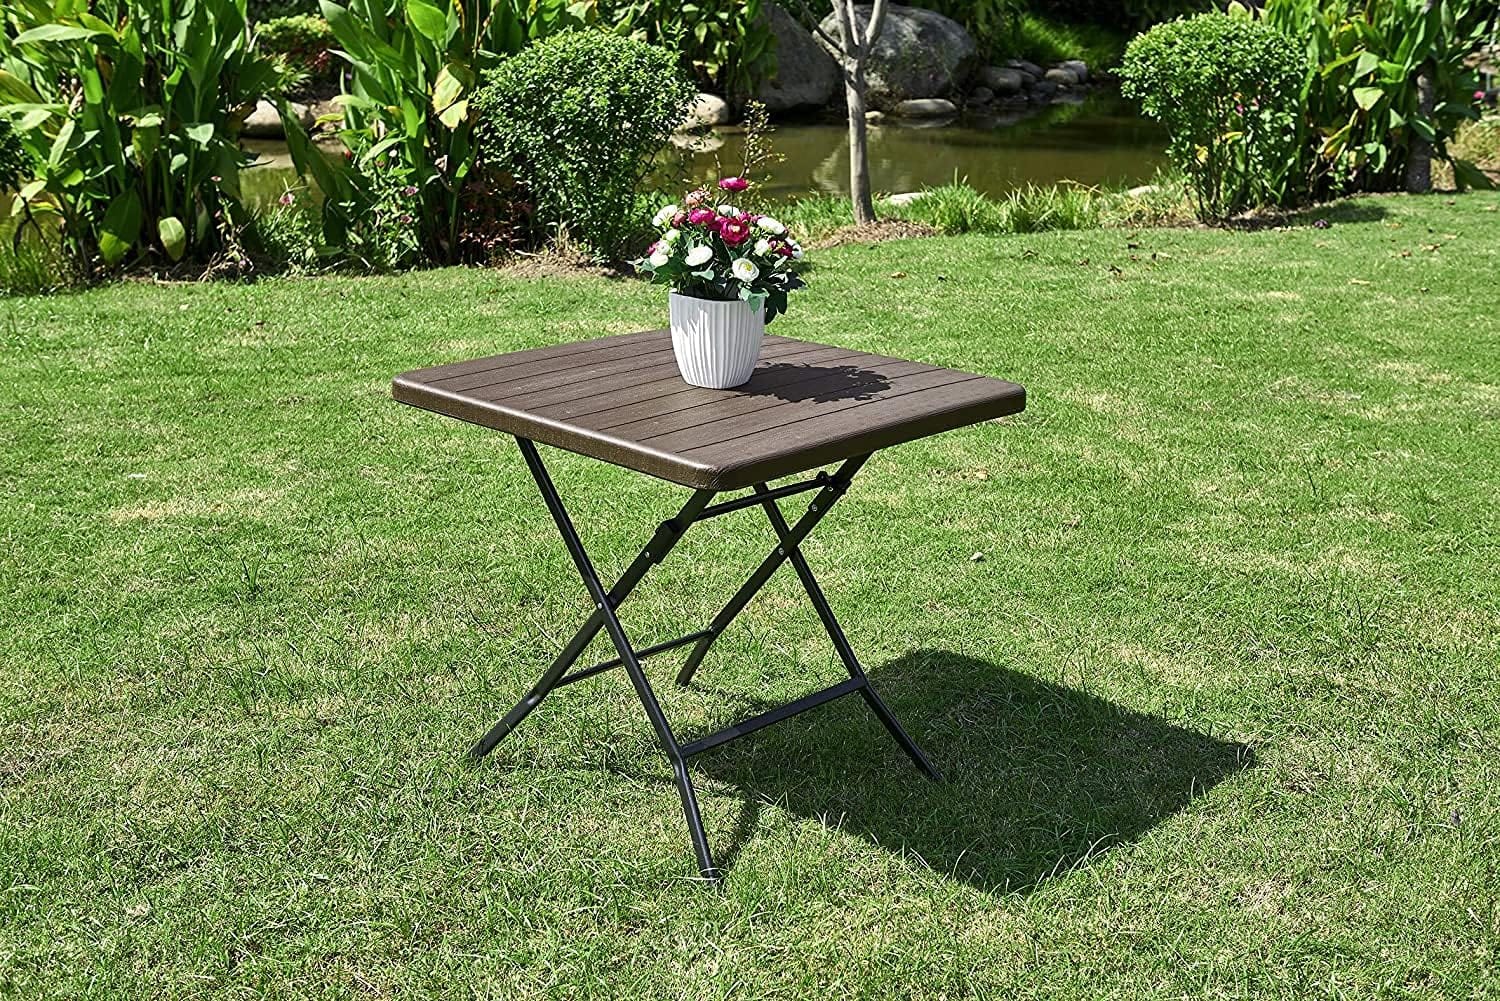 Portable Plastic Folding Table wood Design Party|Picnic|Garden for 2-4 person - Al Ghani Stores